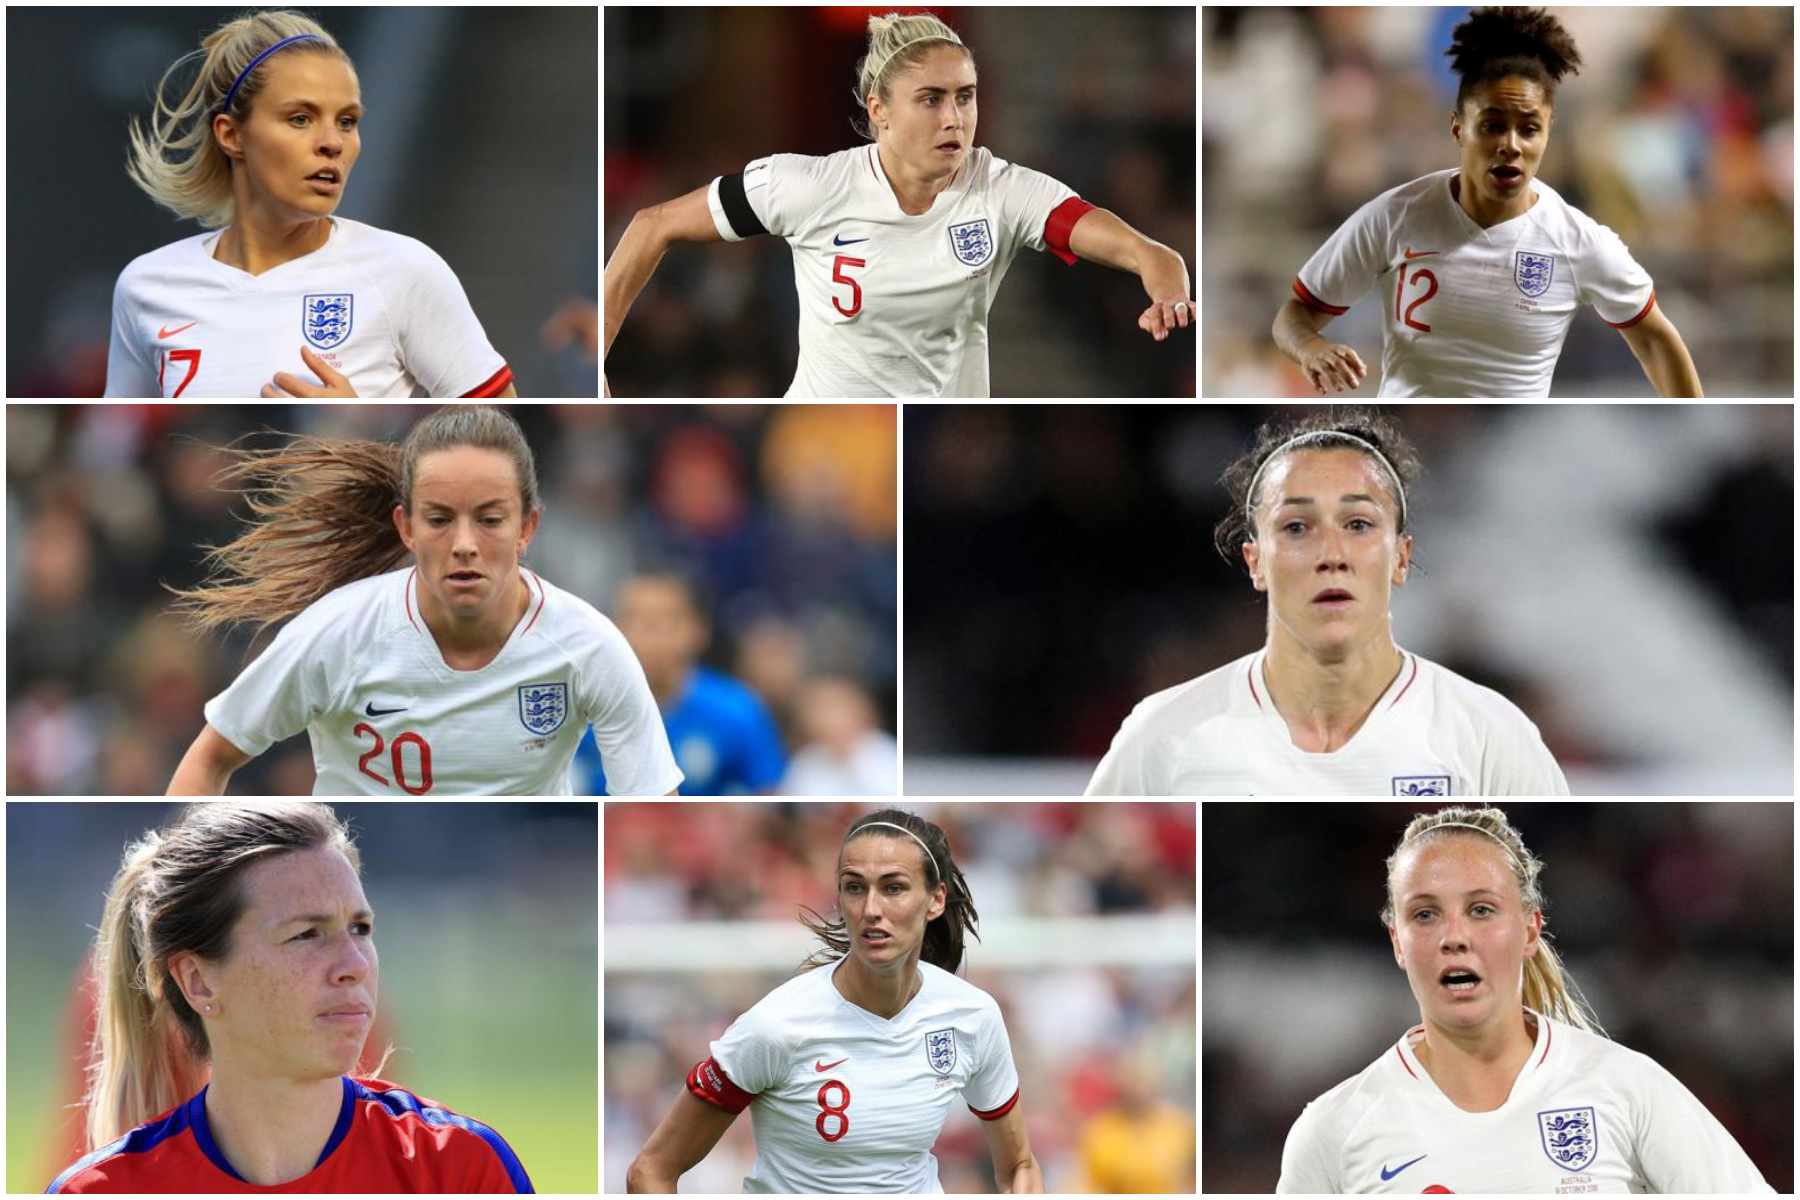 Women's World Cup: Our England stars hoping for glory